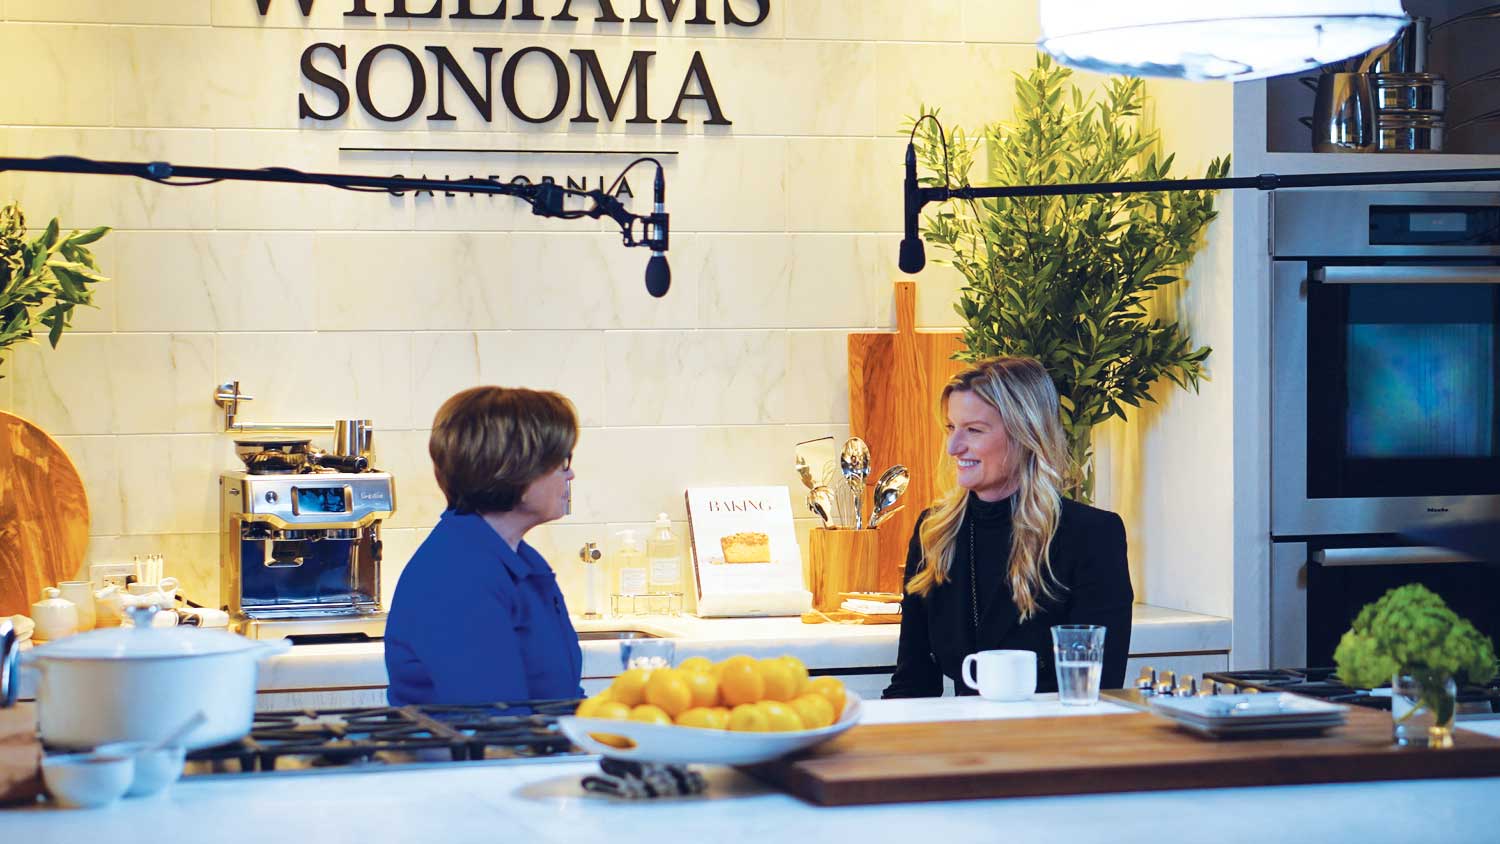 CEO at 40: Behind Laura Alber's Rise at Williams-Sonoma